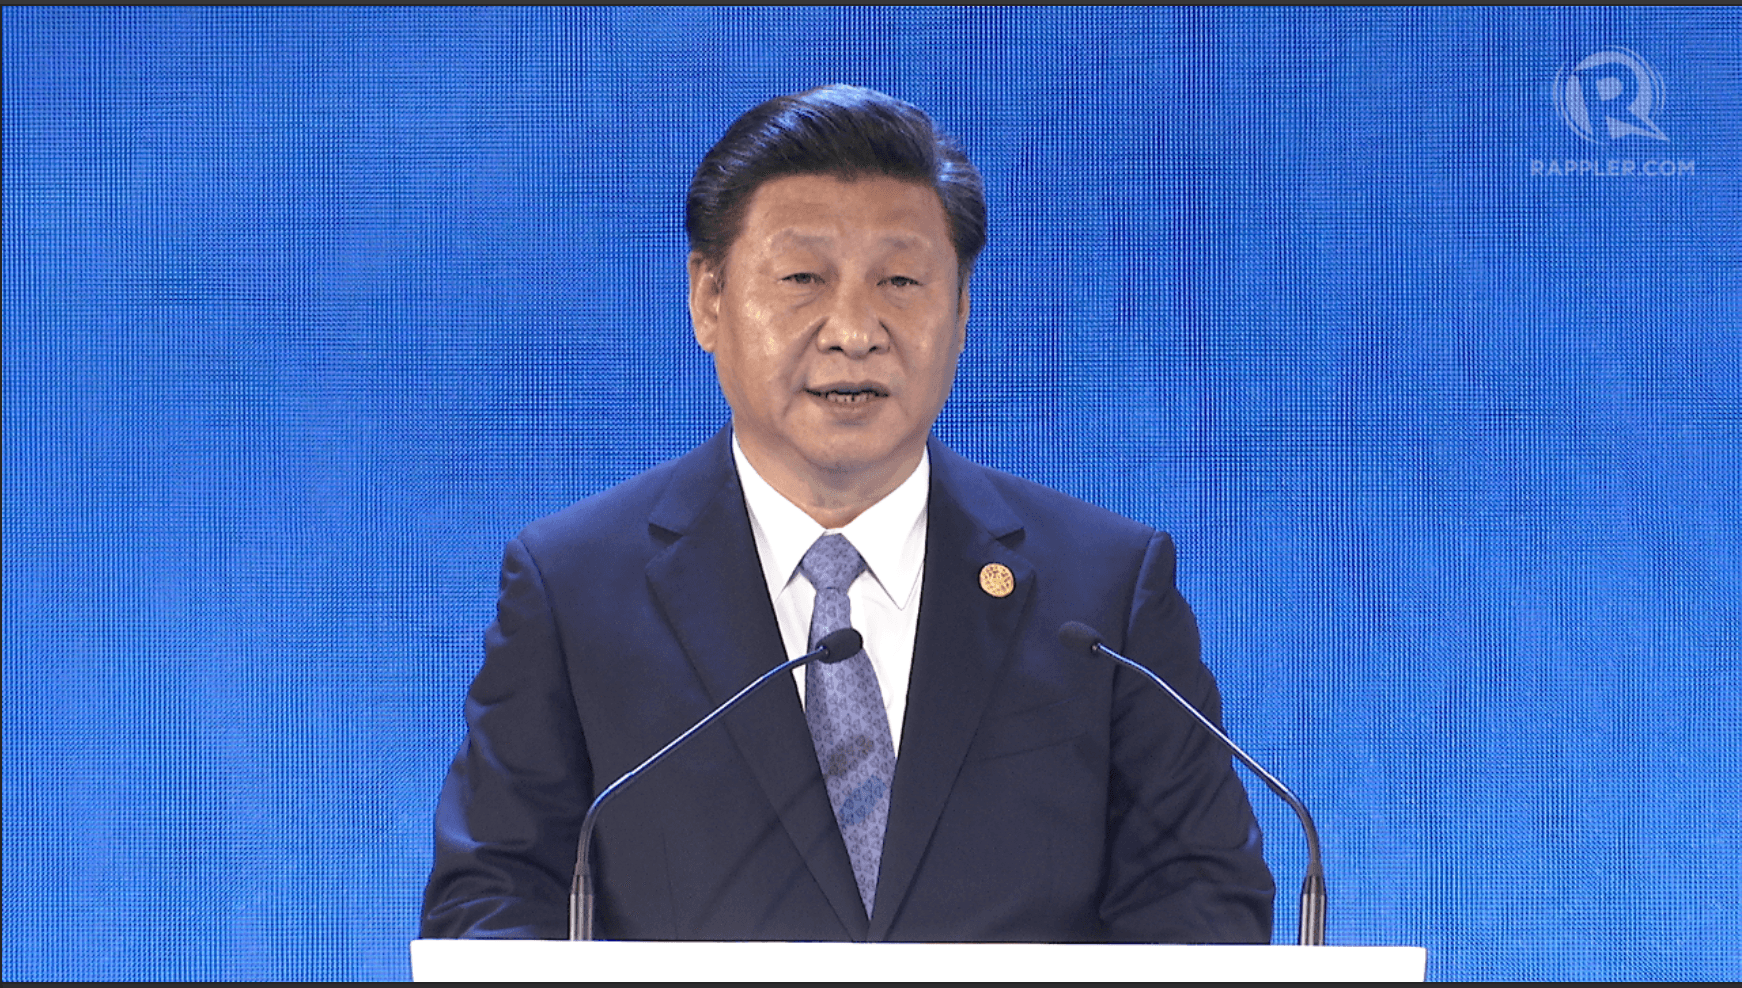 FREE TRADE. China, which is experiencing a sluggish economic growth, is pushing for the Free Trade Agreement of the Asia Pacific. 
'We must commit ourselves to win-win cooperation, oppose protectionism, and promote fair competition," Chinese President Xi Jinping tells the powerhouse participants at the APEC CEO Summit on Wednesday.  